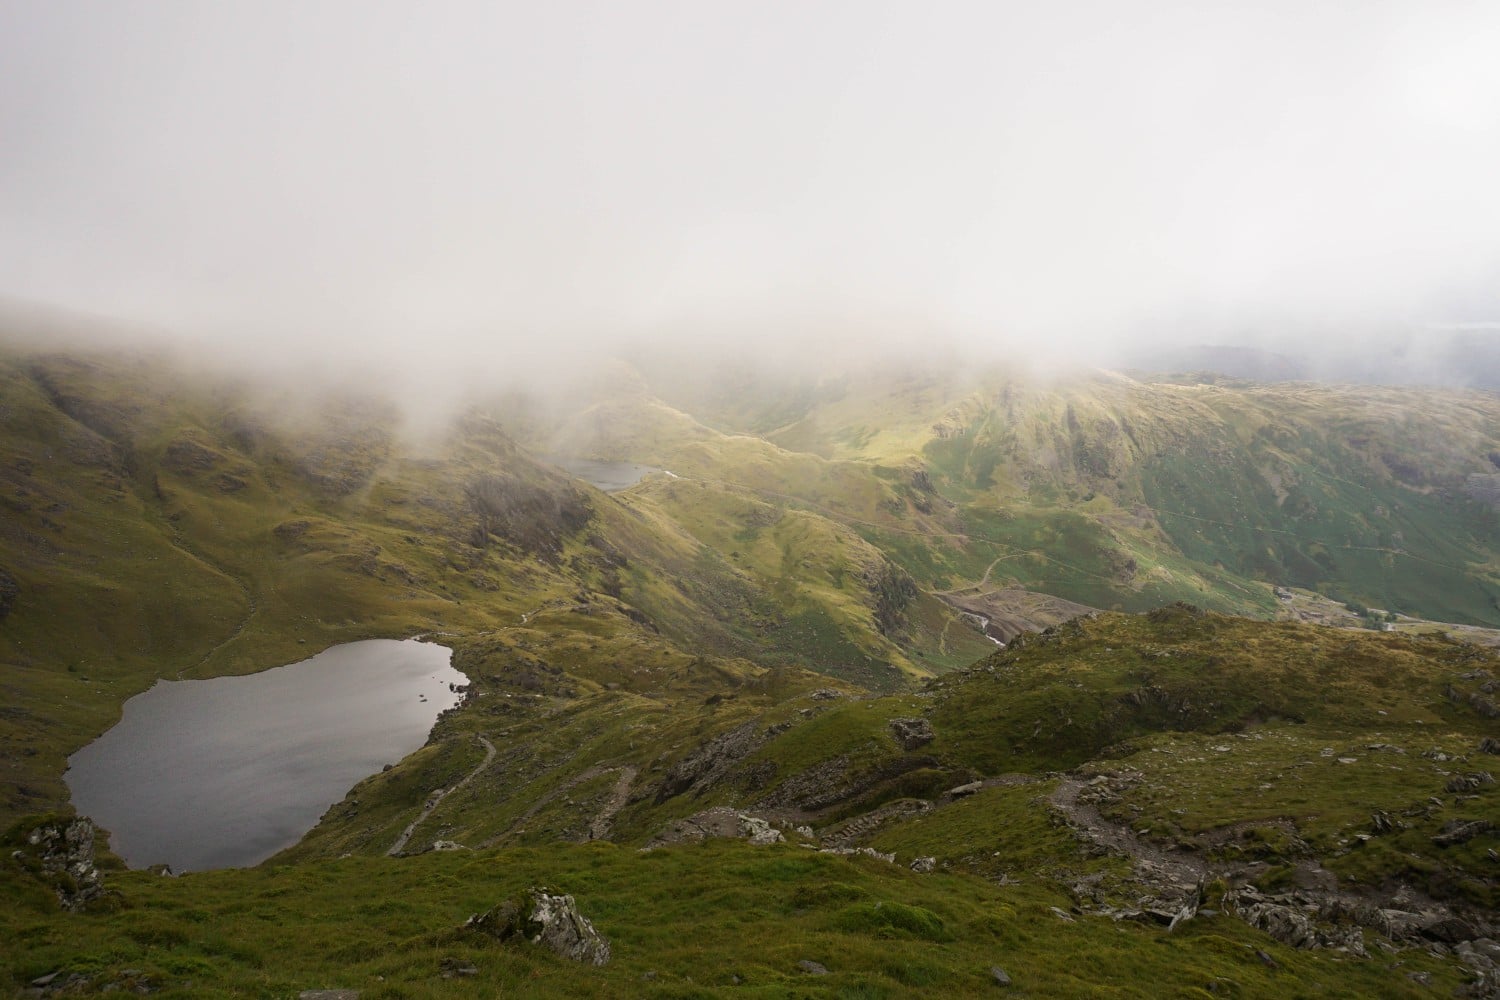 Lake District - Old Man of Coniston. Looking out over Low Water. Read our full guide to hiking in the Lake District.